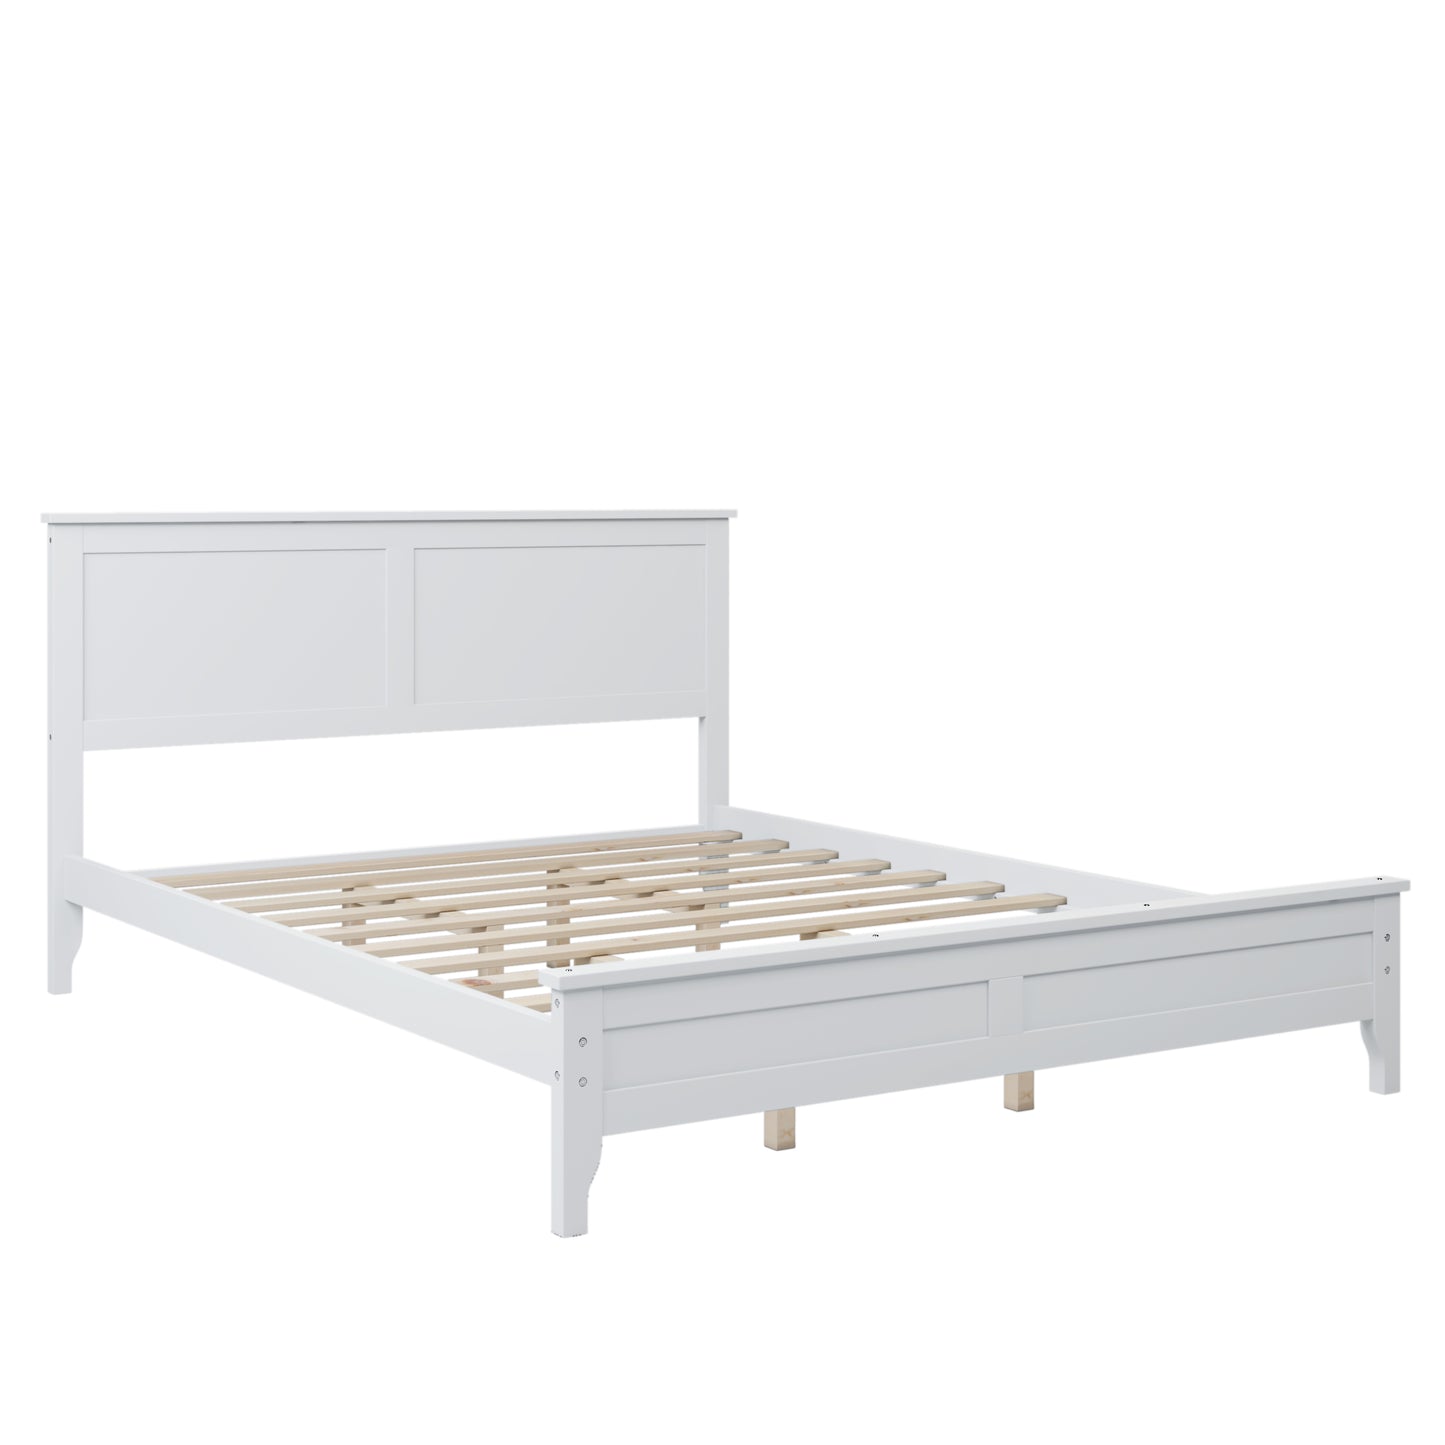 Queen Size Bed Frame with Headboard, Platform Bed Frame Solid Wood with Headboard, 800lbs Weight Capacity, White, LJ2082